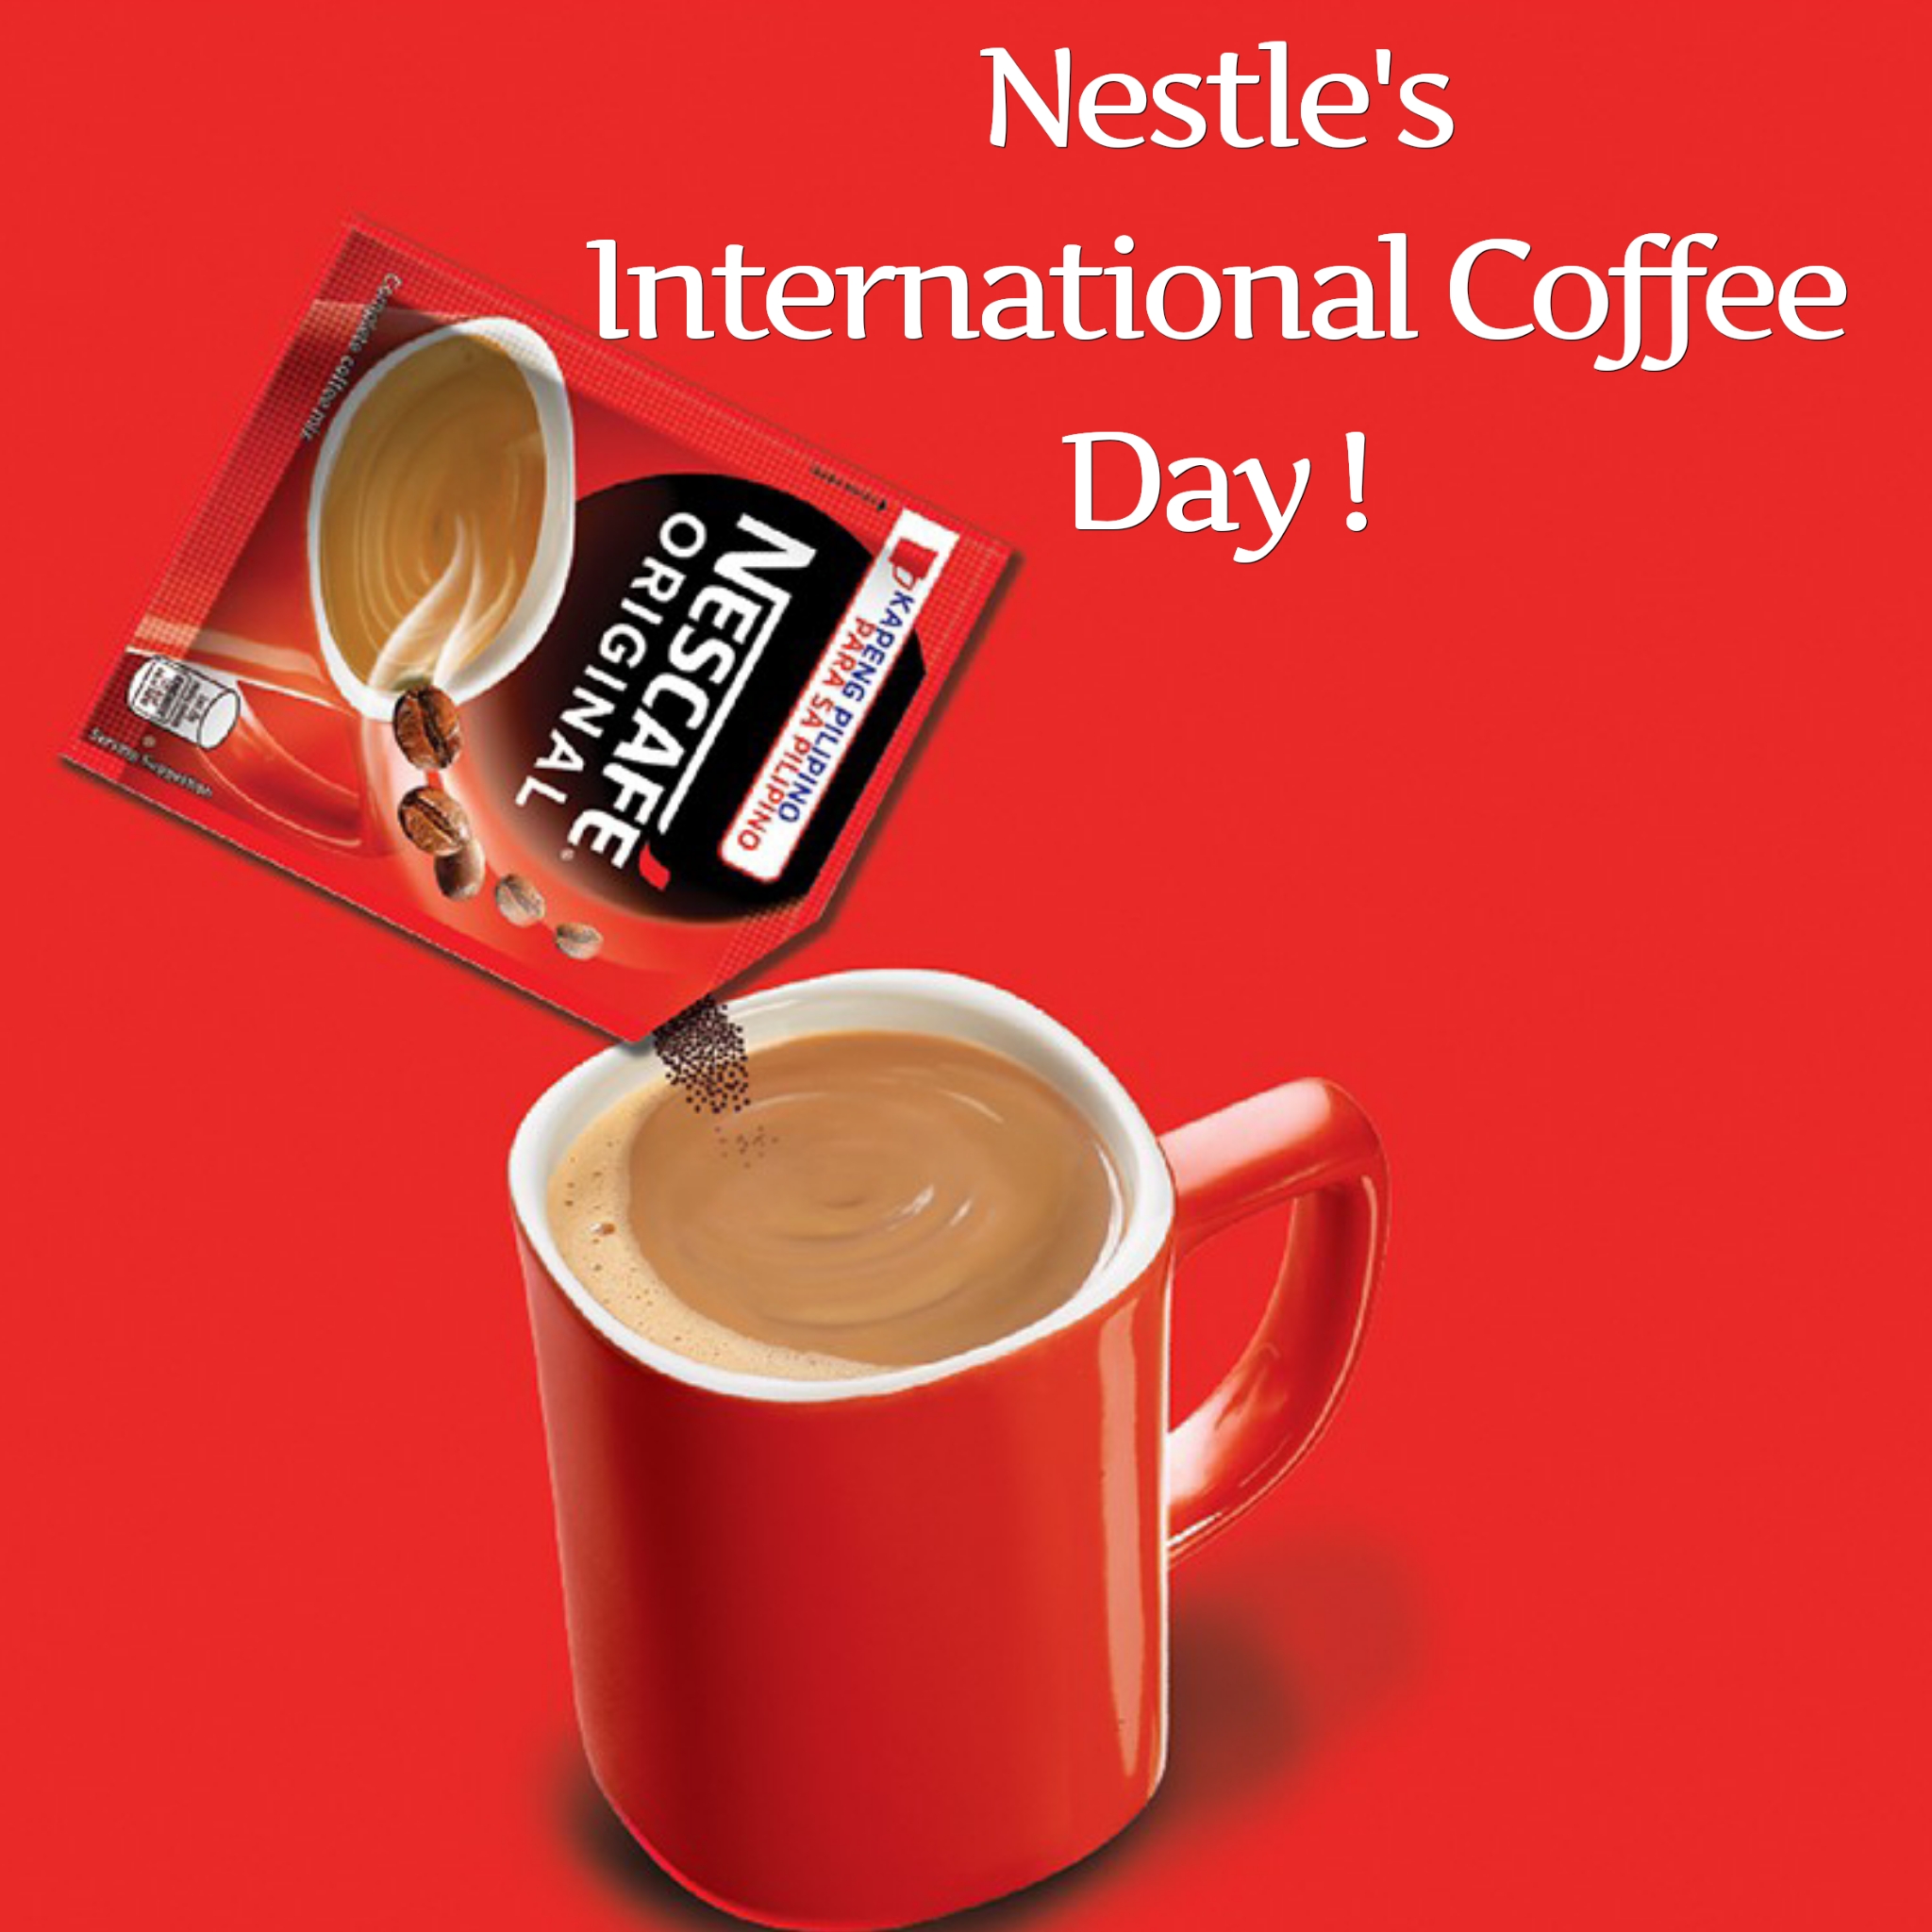 Celebrate international coffee day with us at Super Sconto and